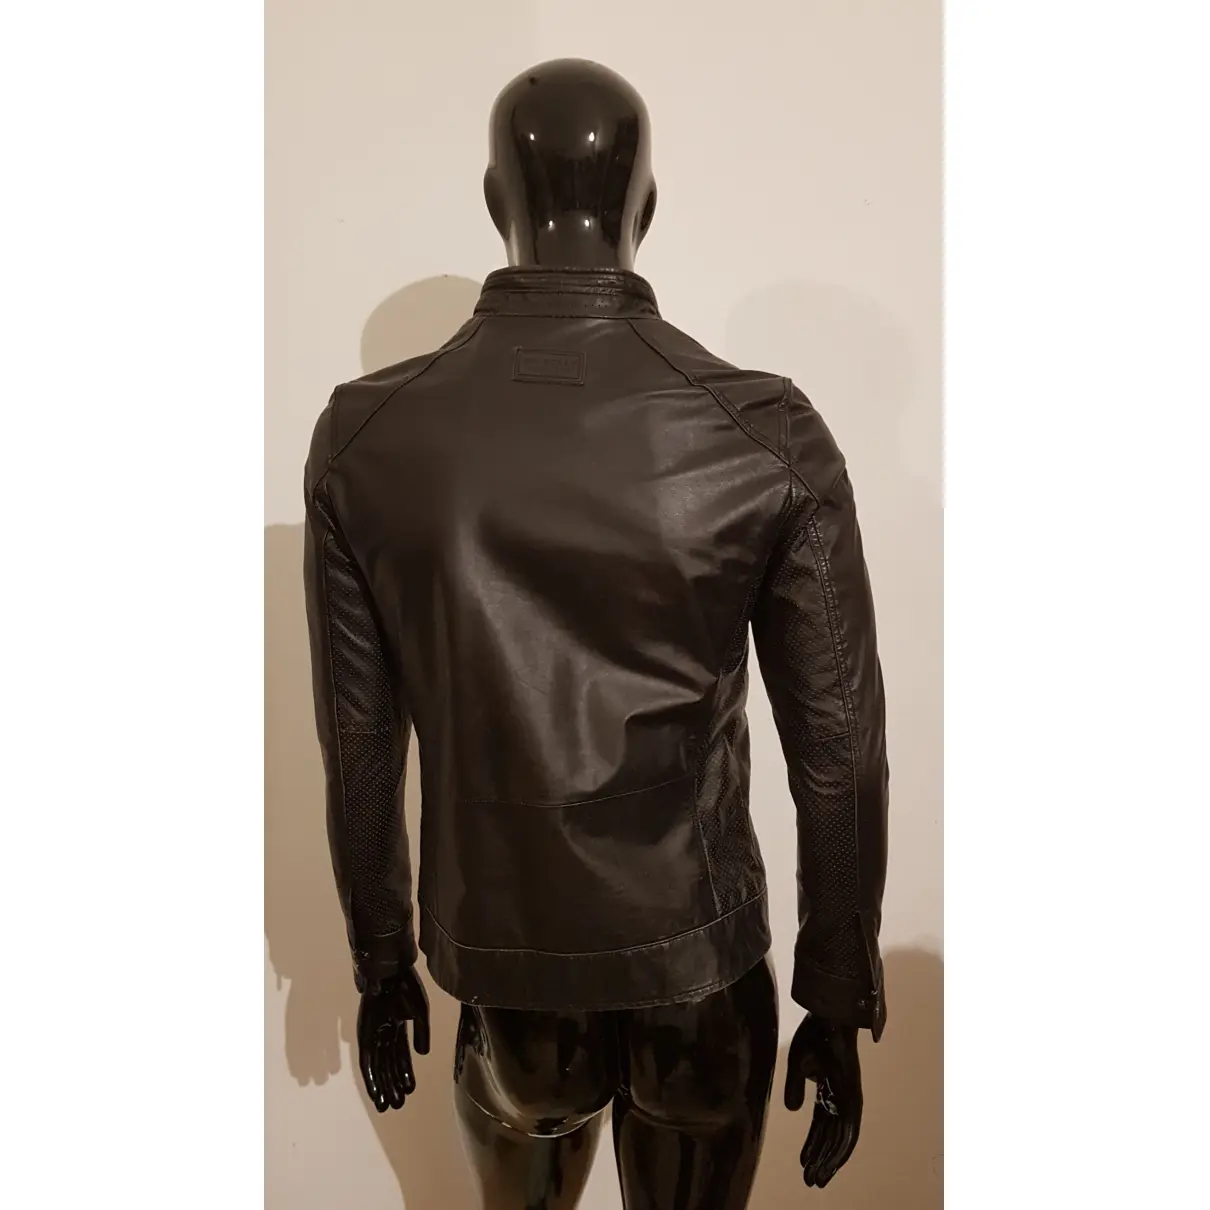 Buy Selected Leather jacket online